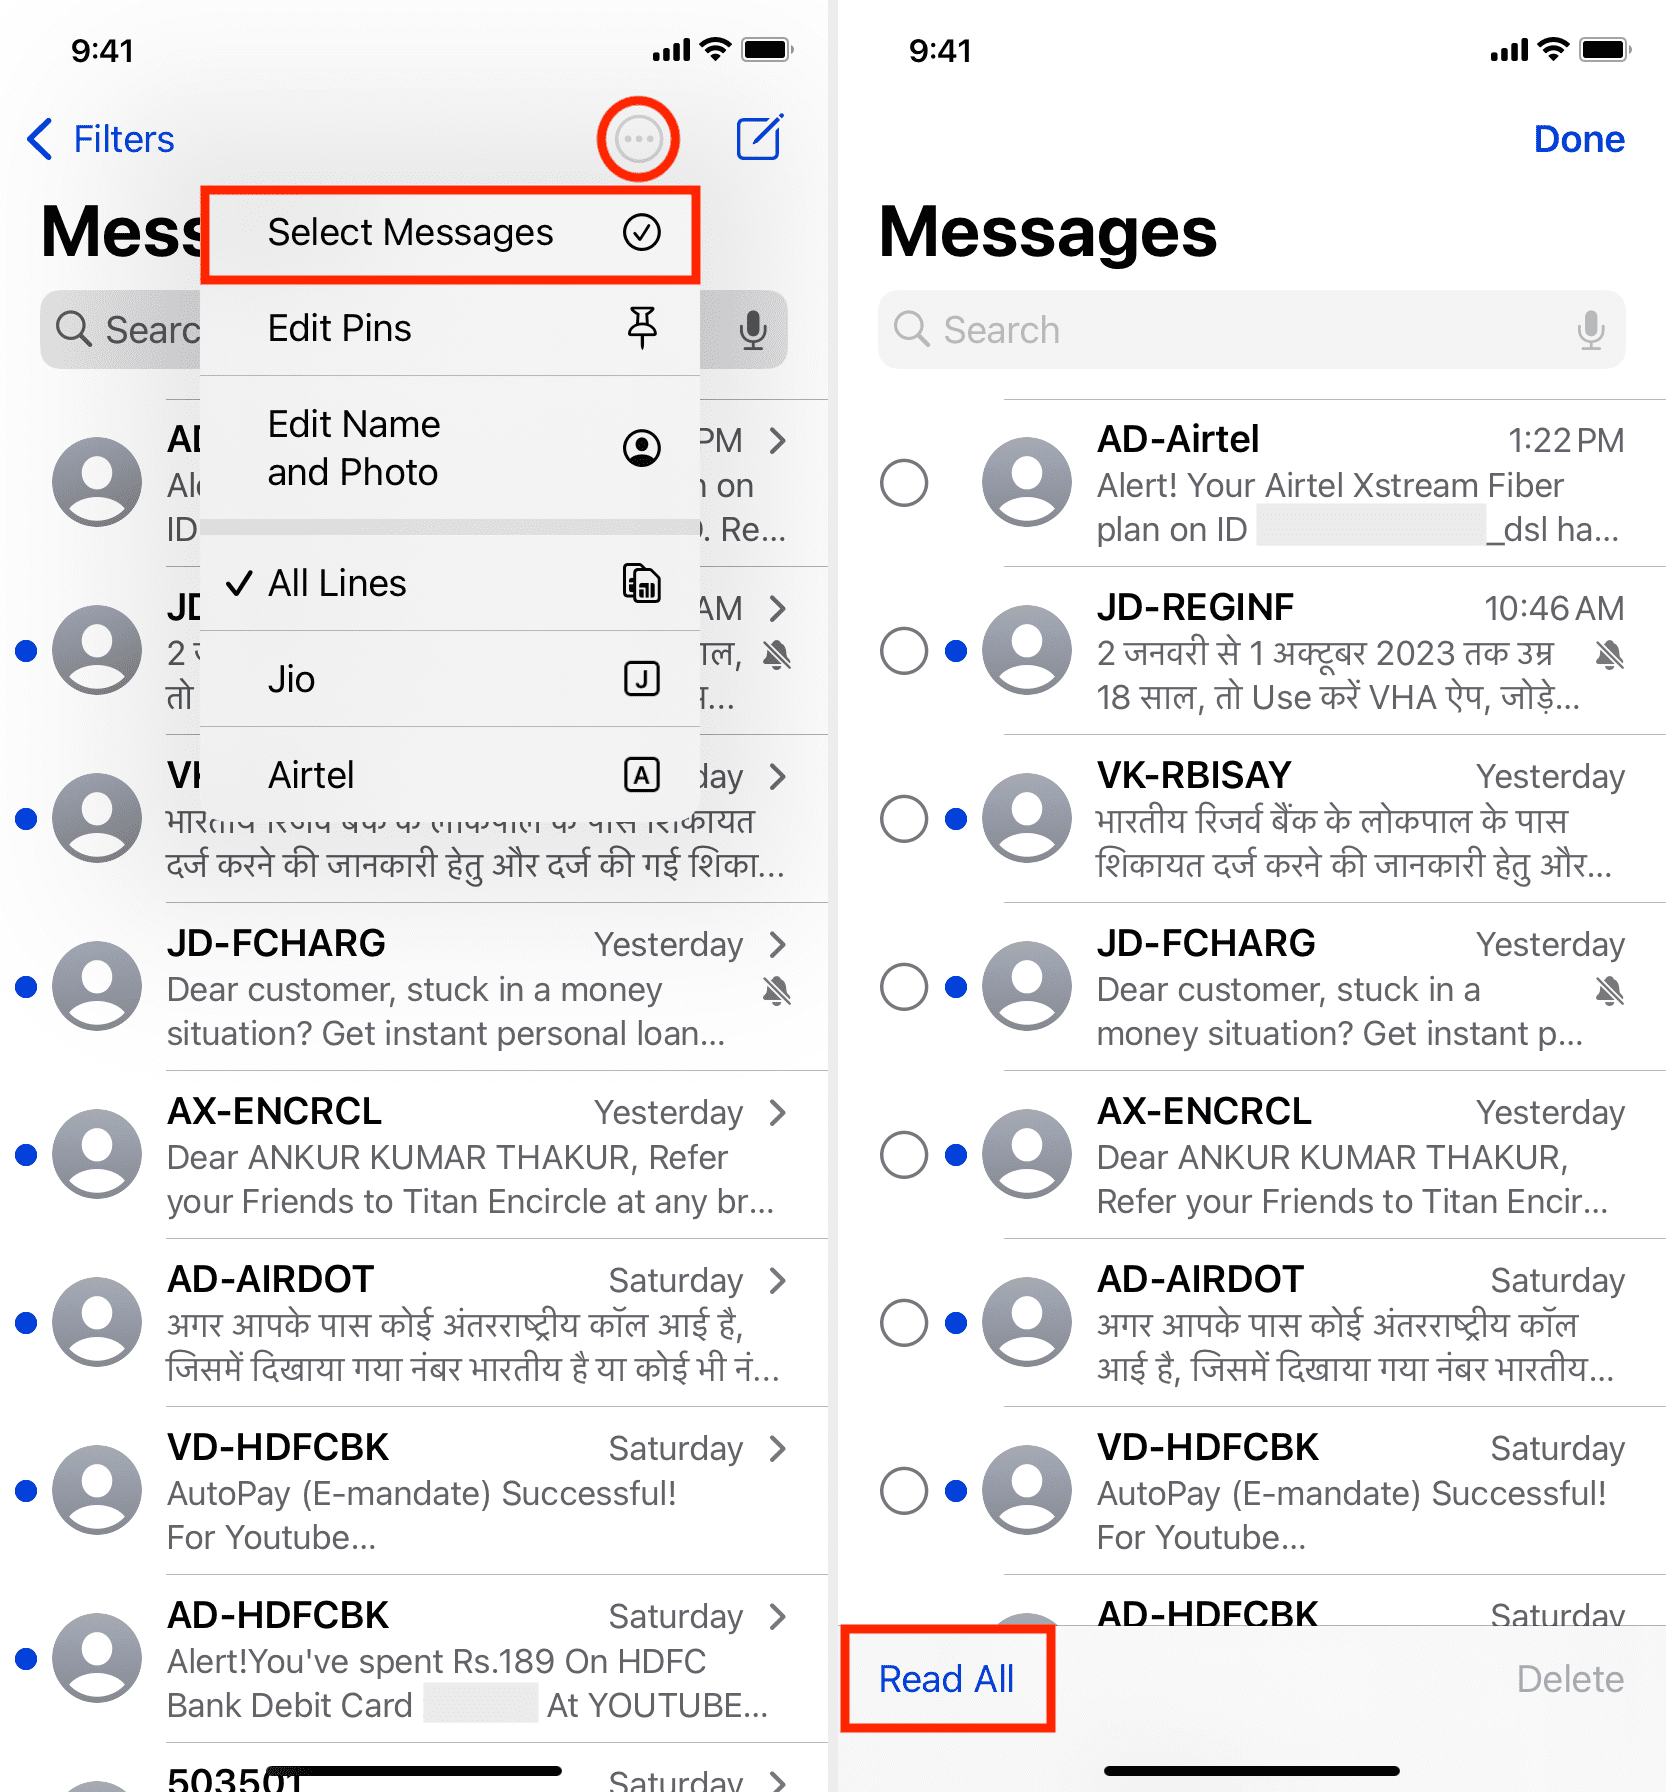 Instantly mark all messages as read on iPhone